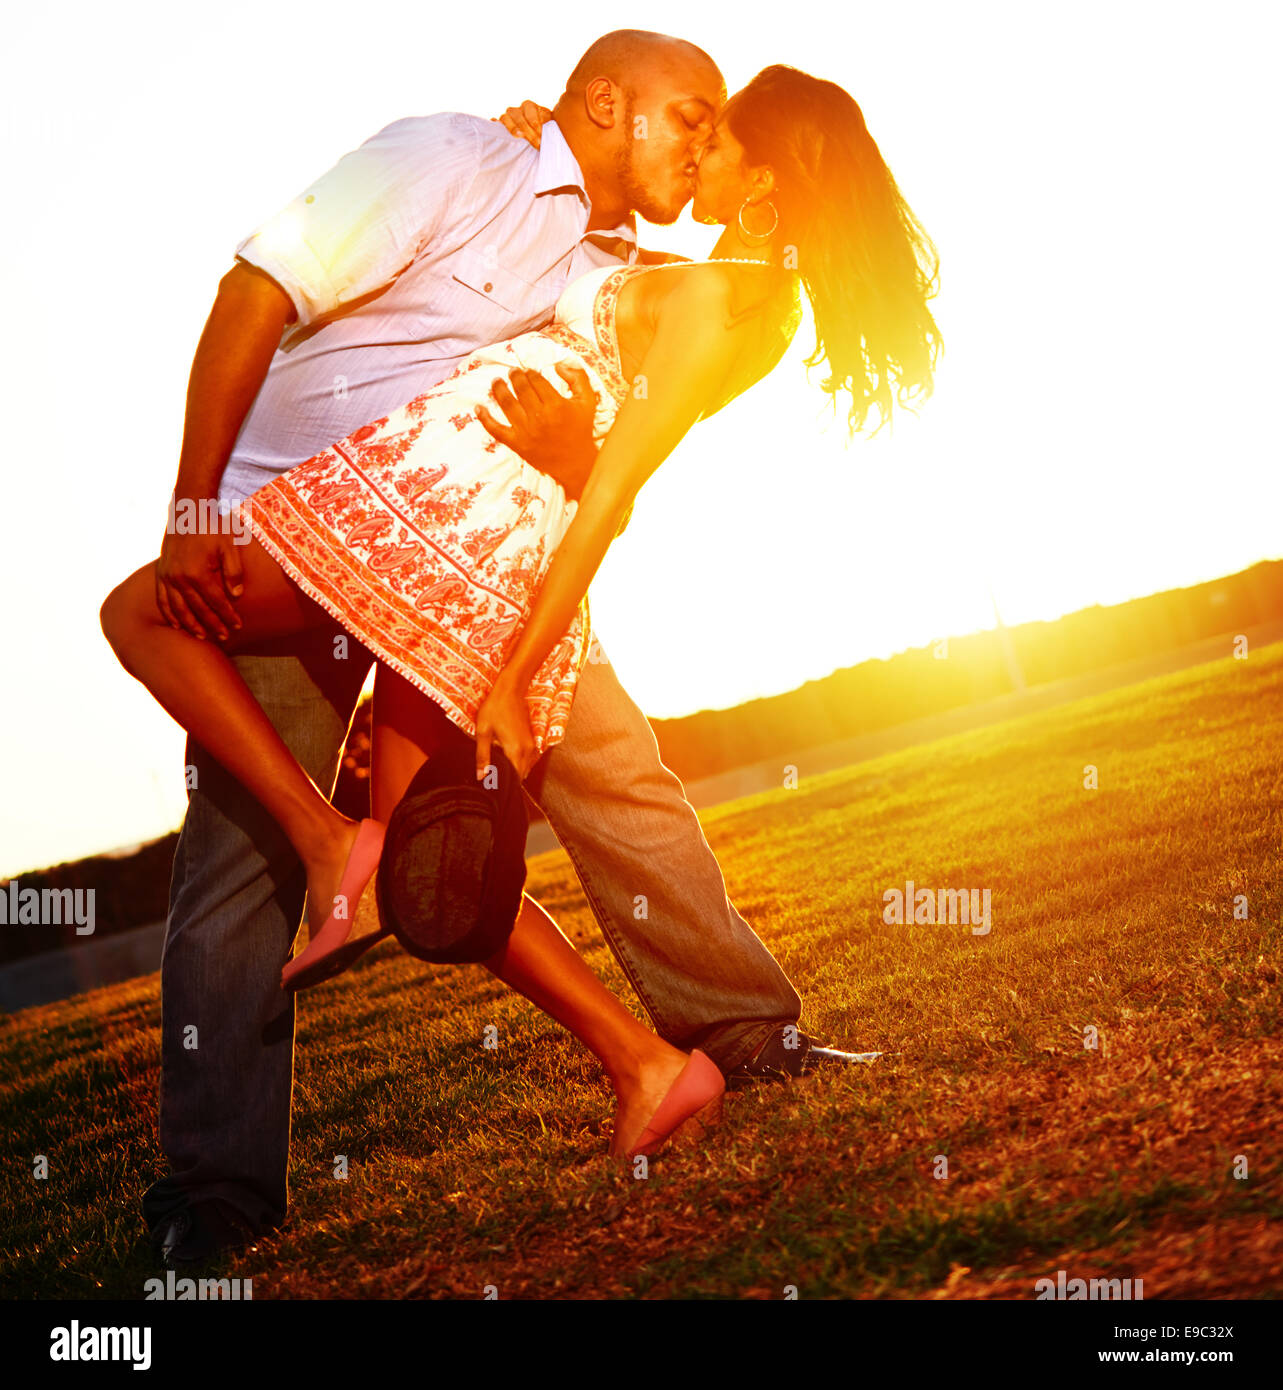 Couple kissing romantically during sunset Stock Photo